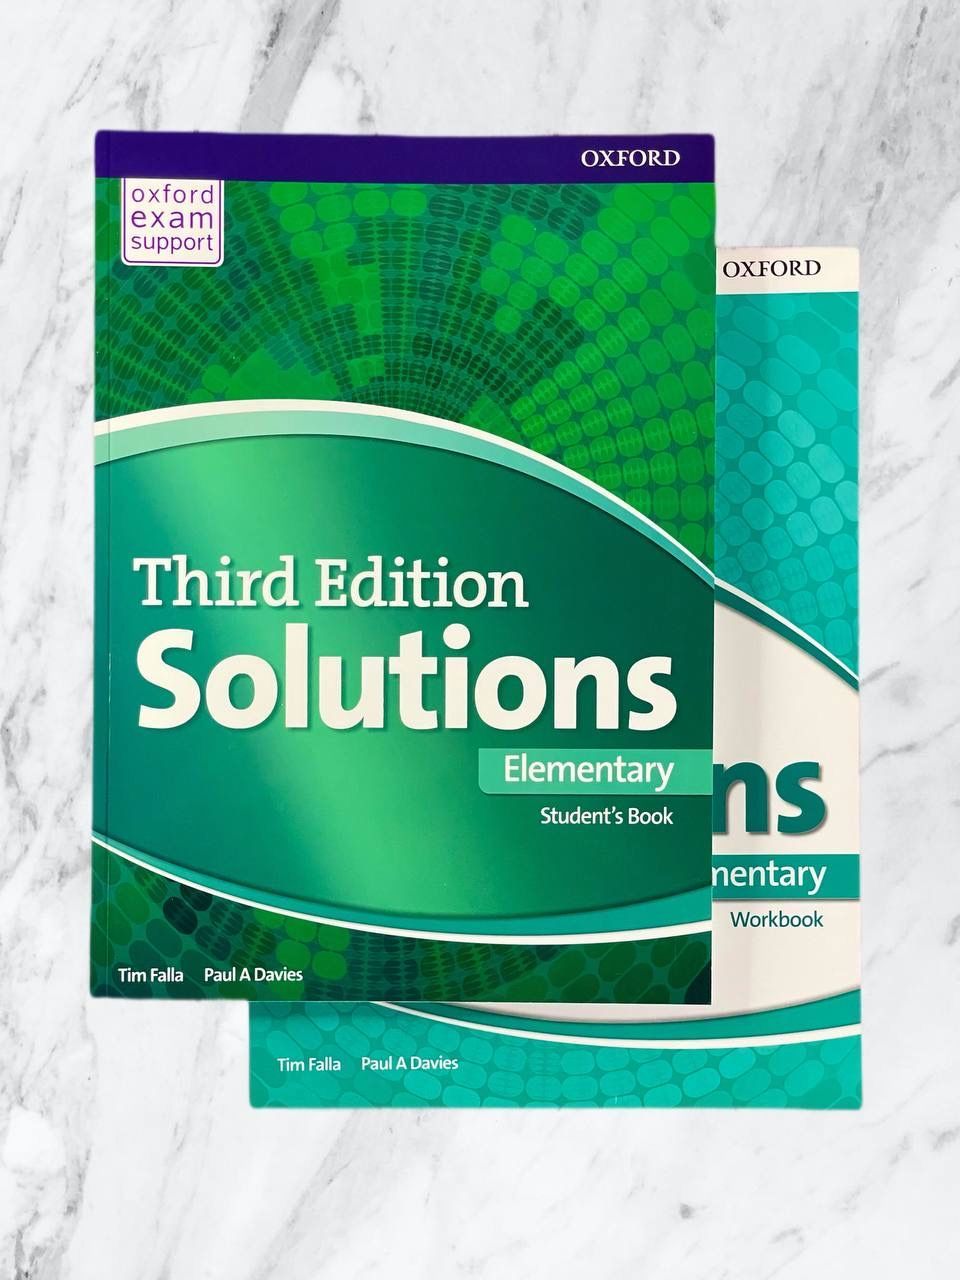 Solutions elementary 3rd edition audio students. Учебник solutions Elementary. Учебник Солюшенс элементари. Solutions Elementary 3rd Edition. Solutions Elementary: Workbook.